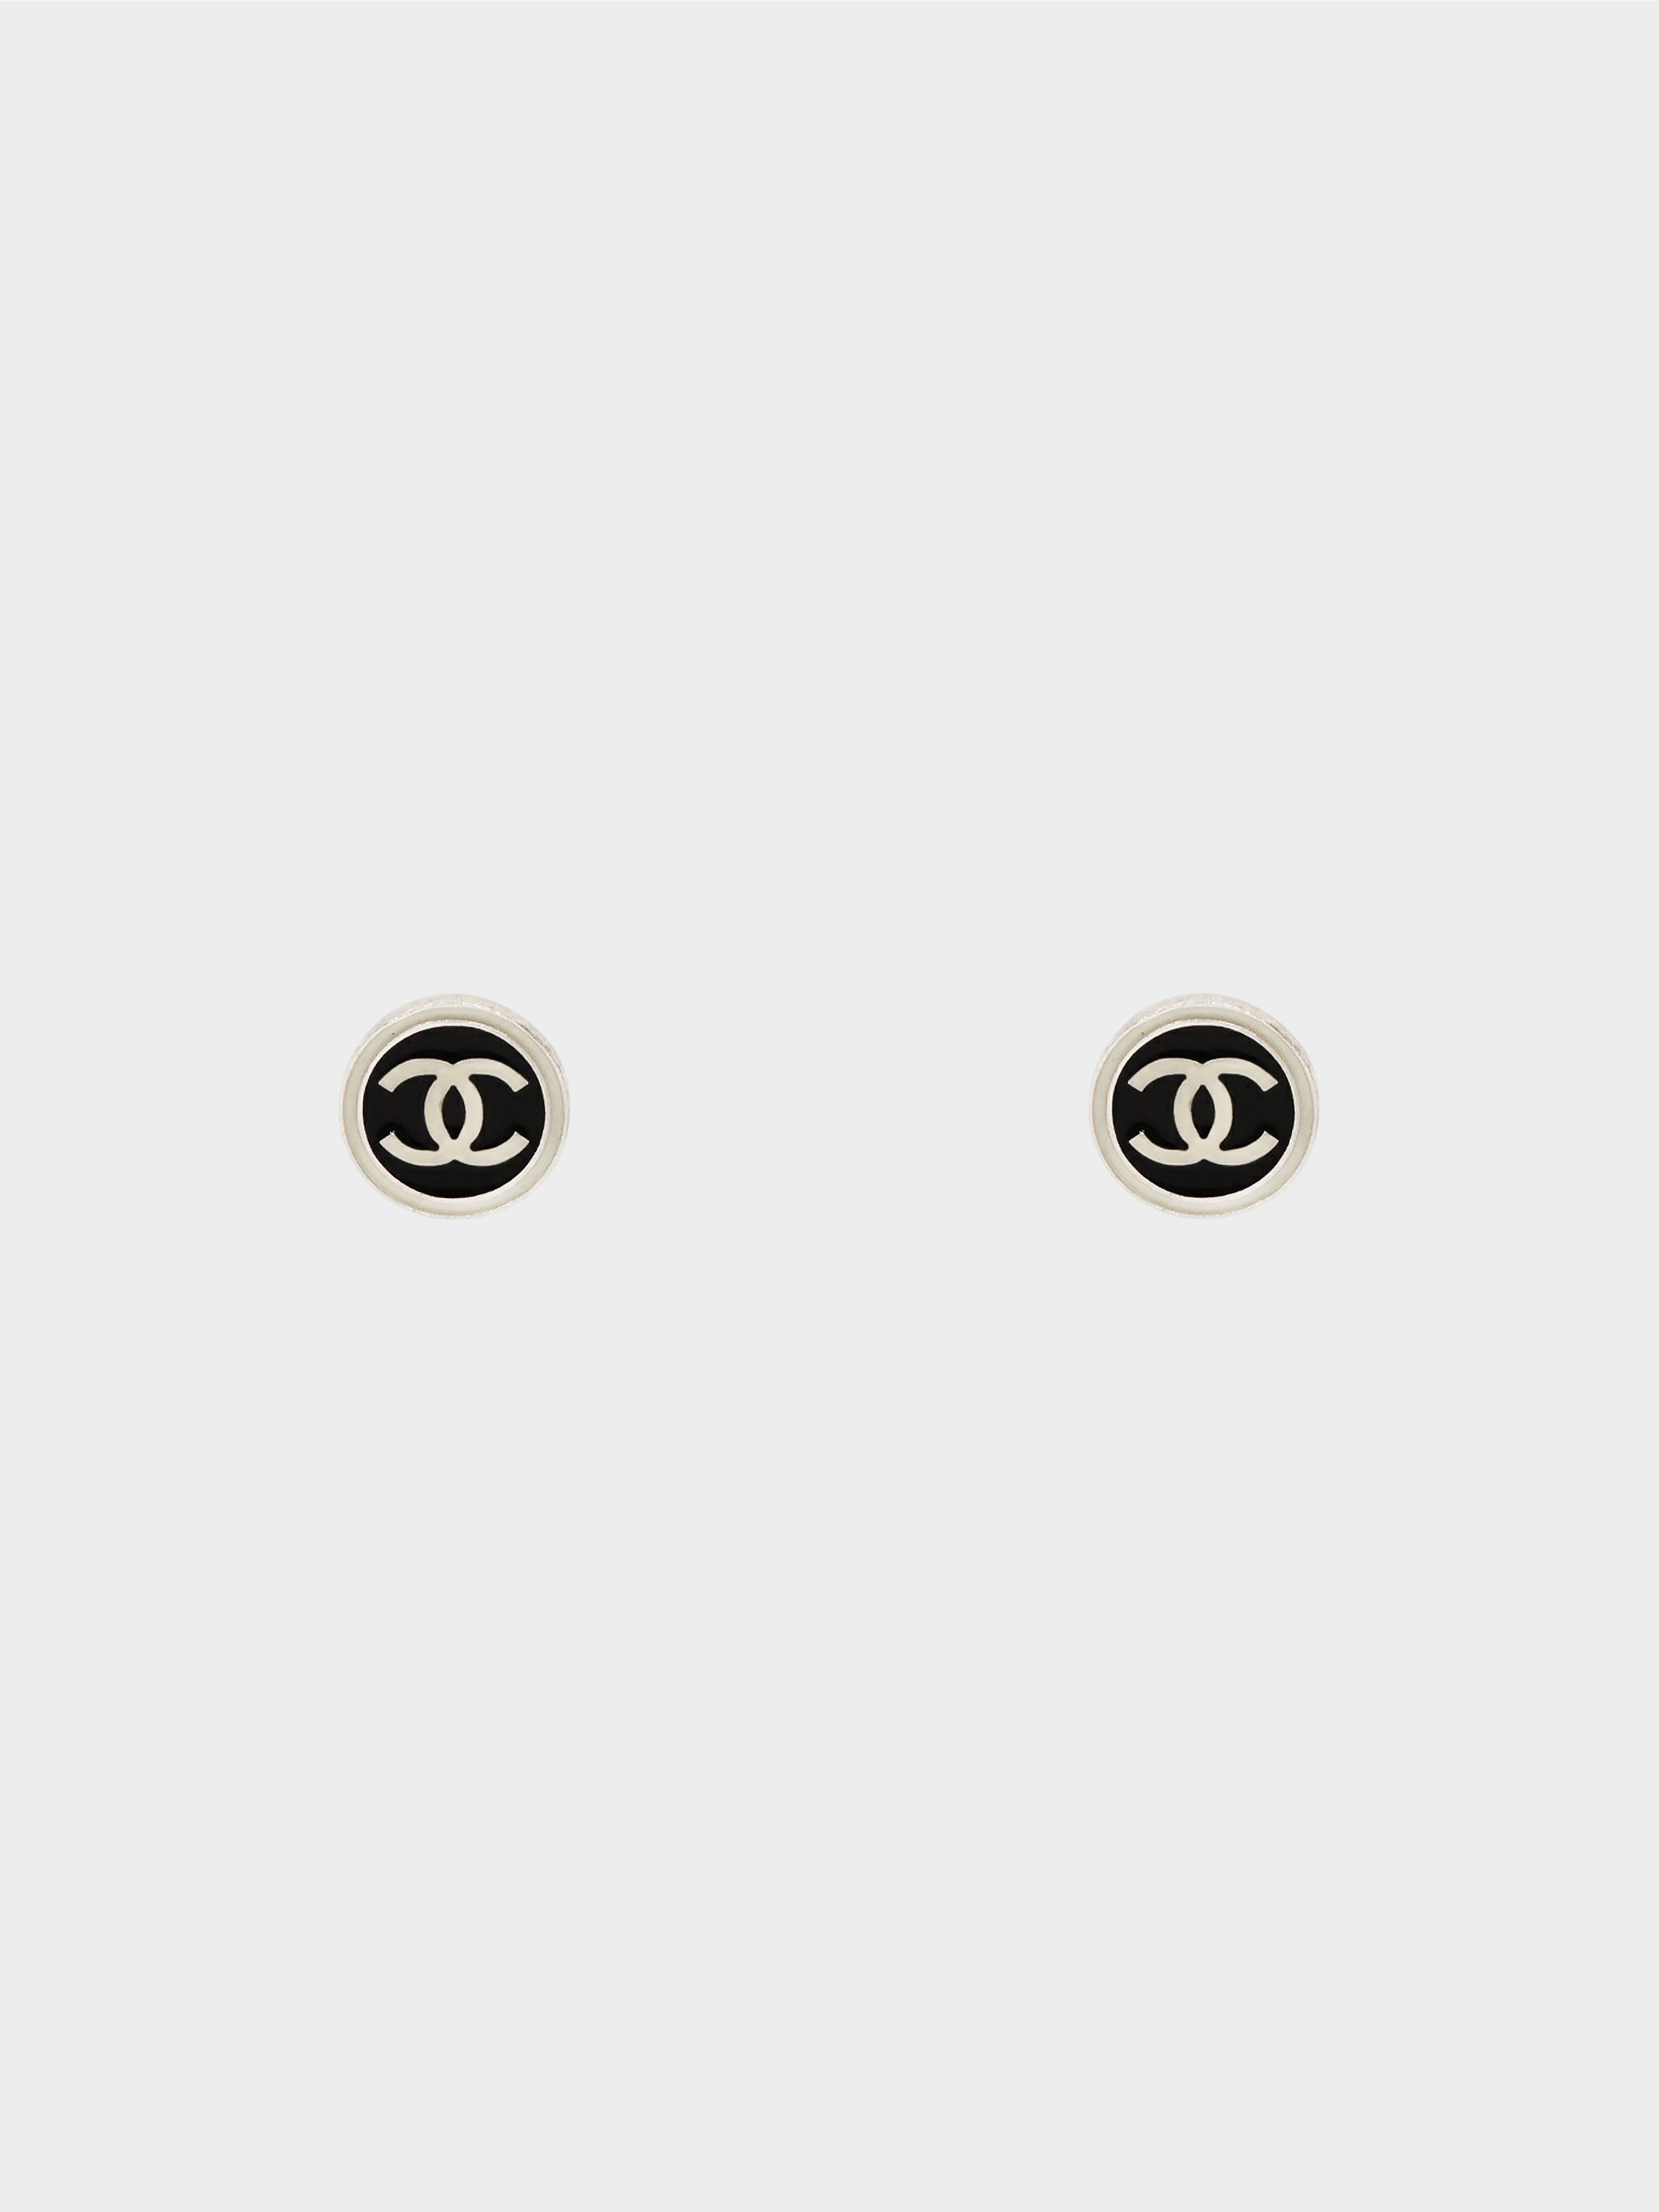 Chanel 2000s Black and White Round CC Stud Earrings